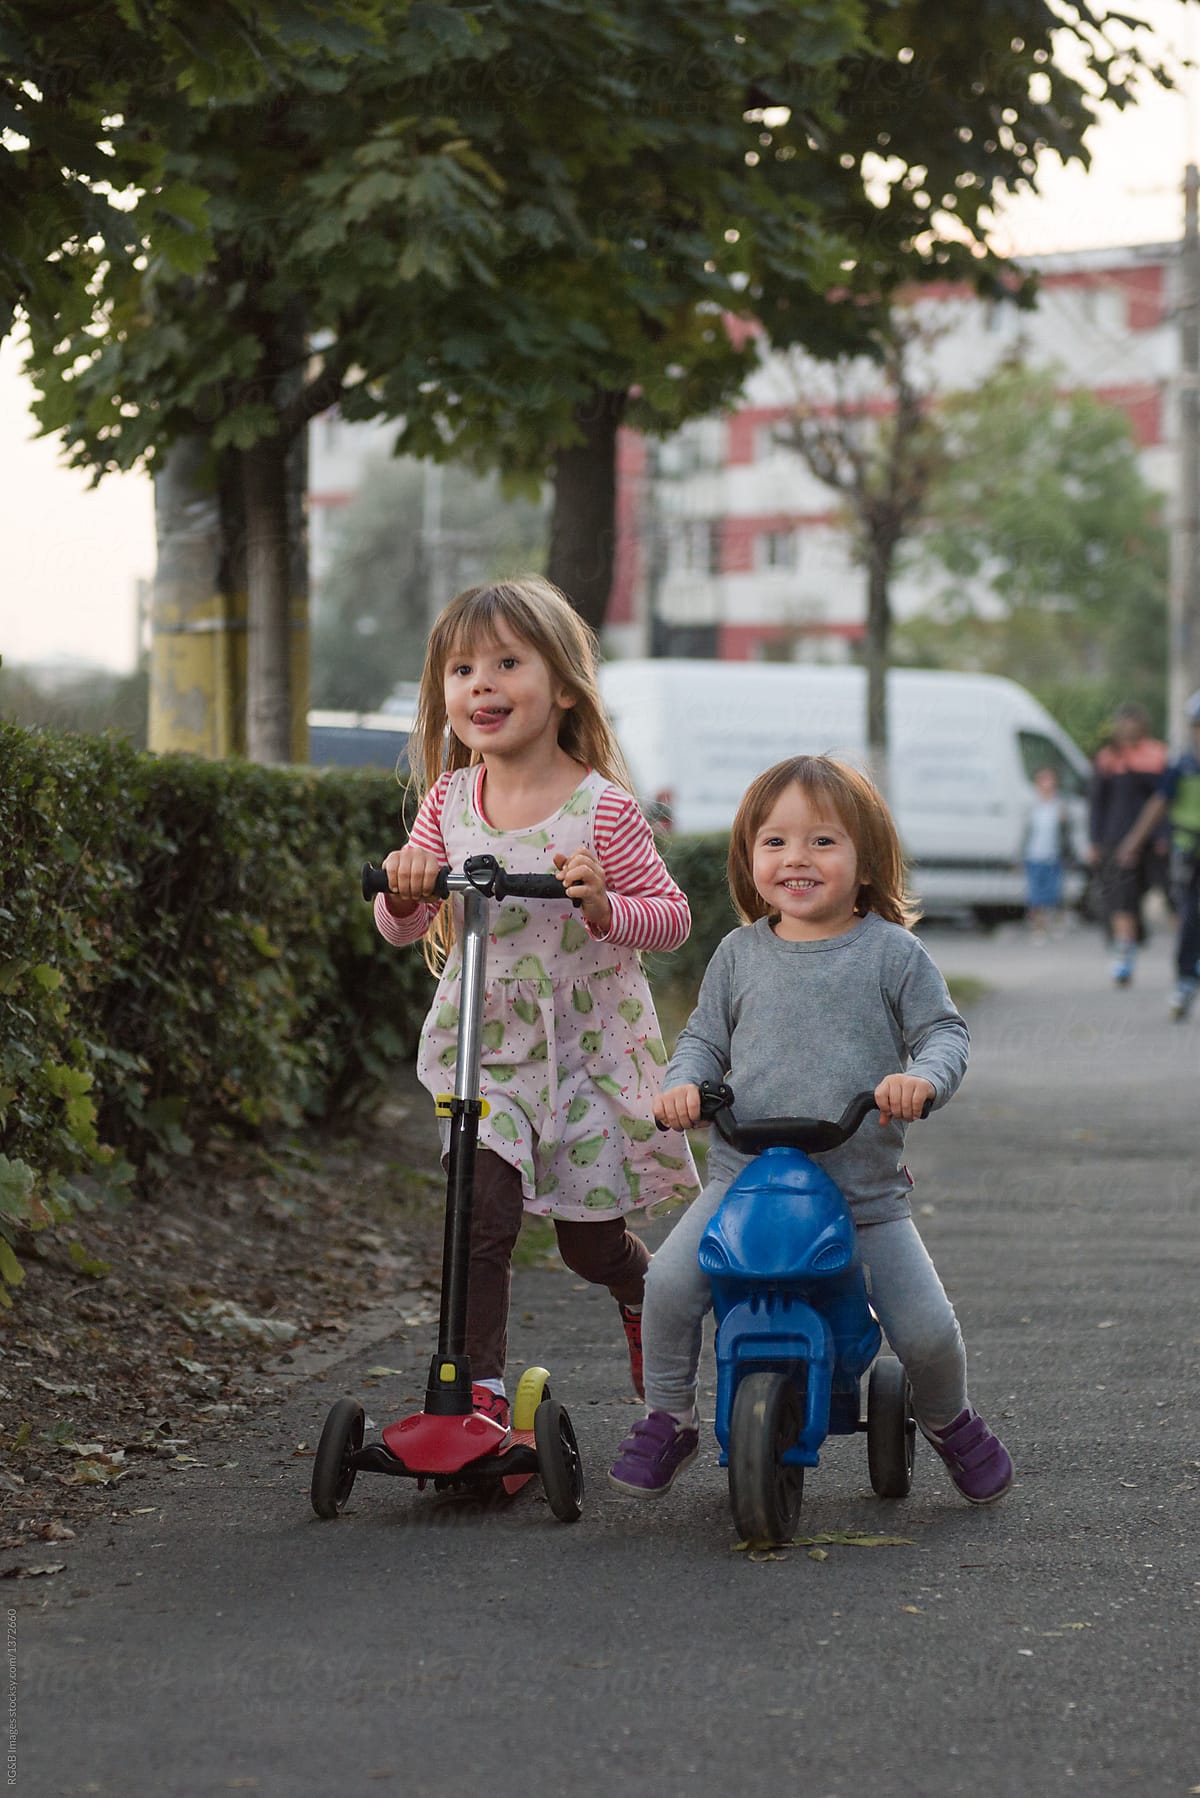 Children riding scooters on the sidewalk